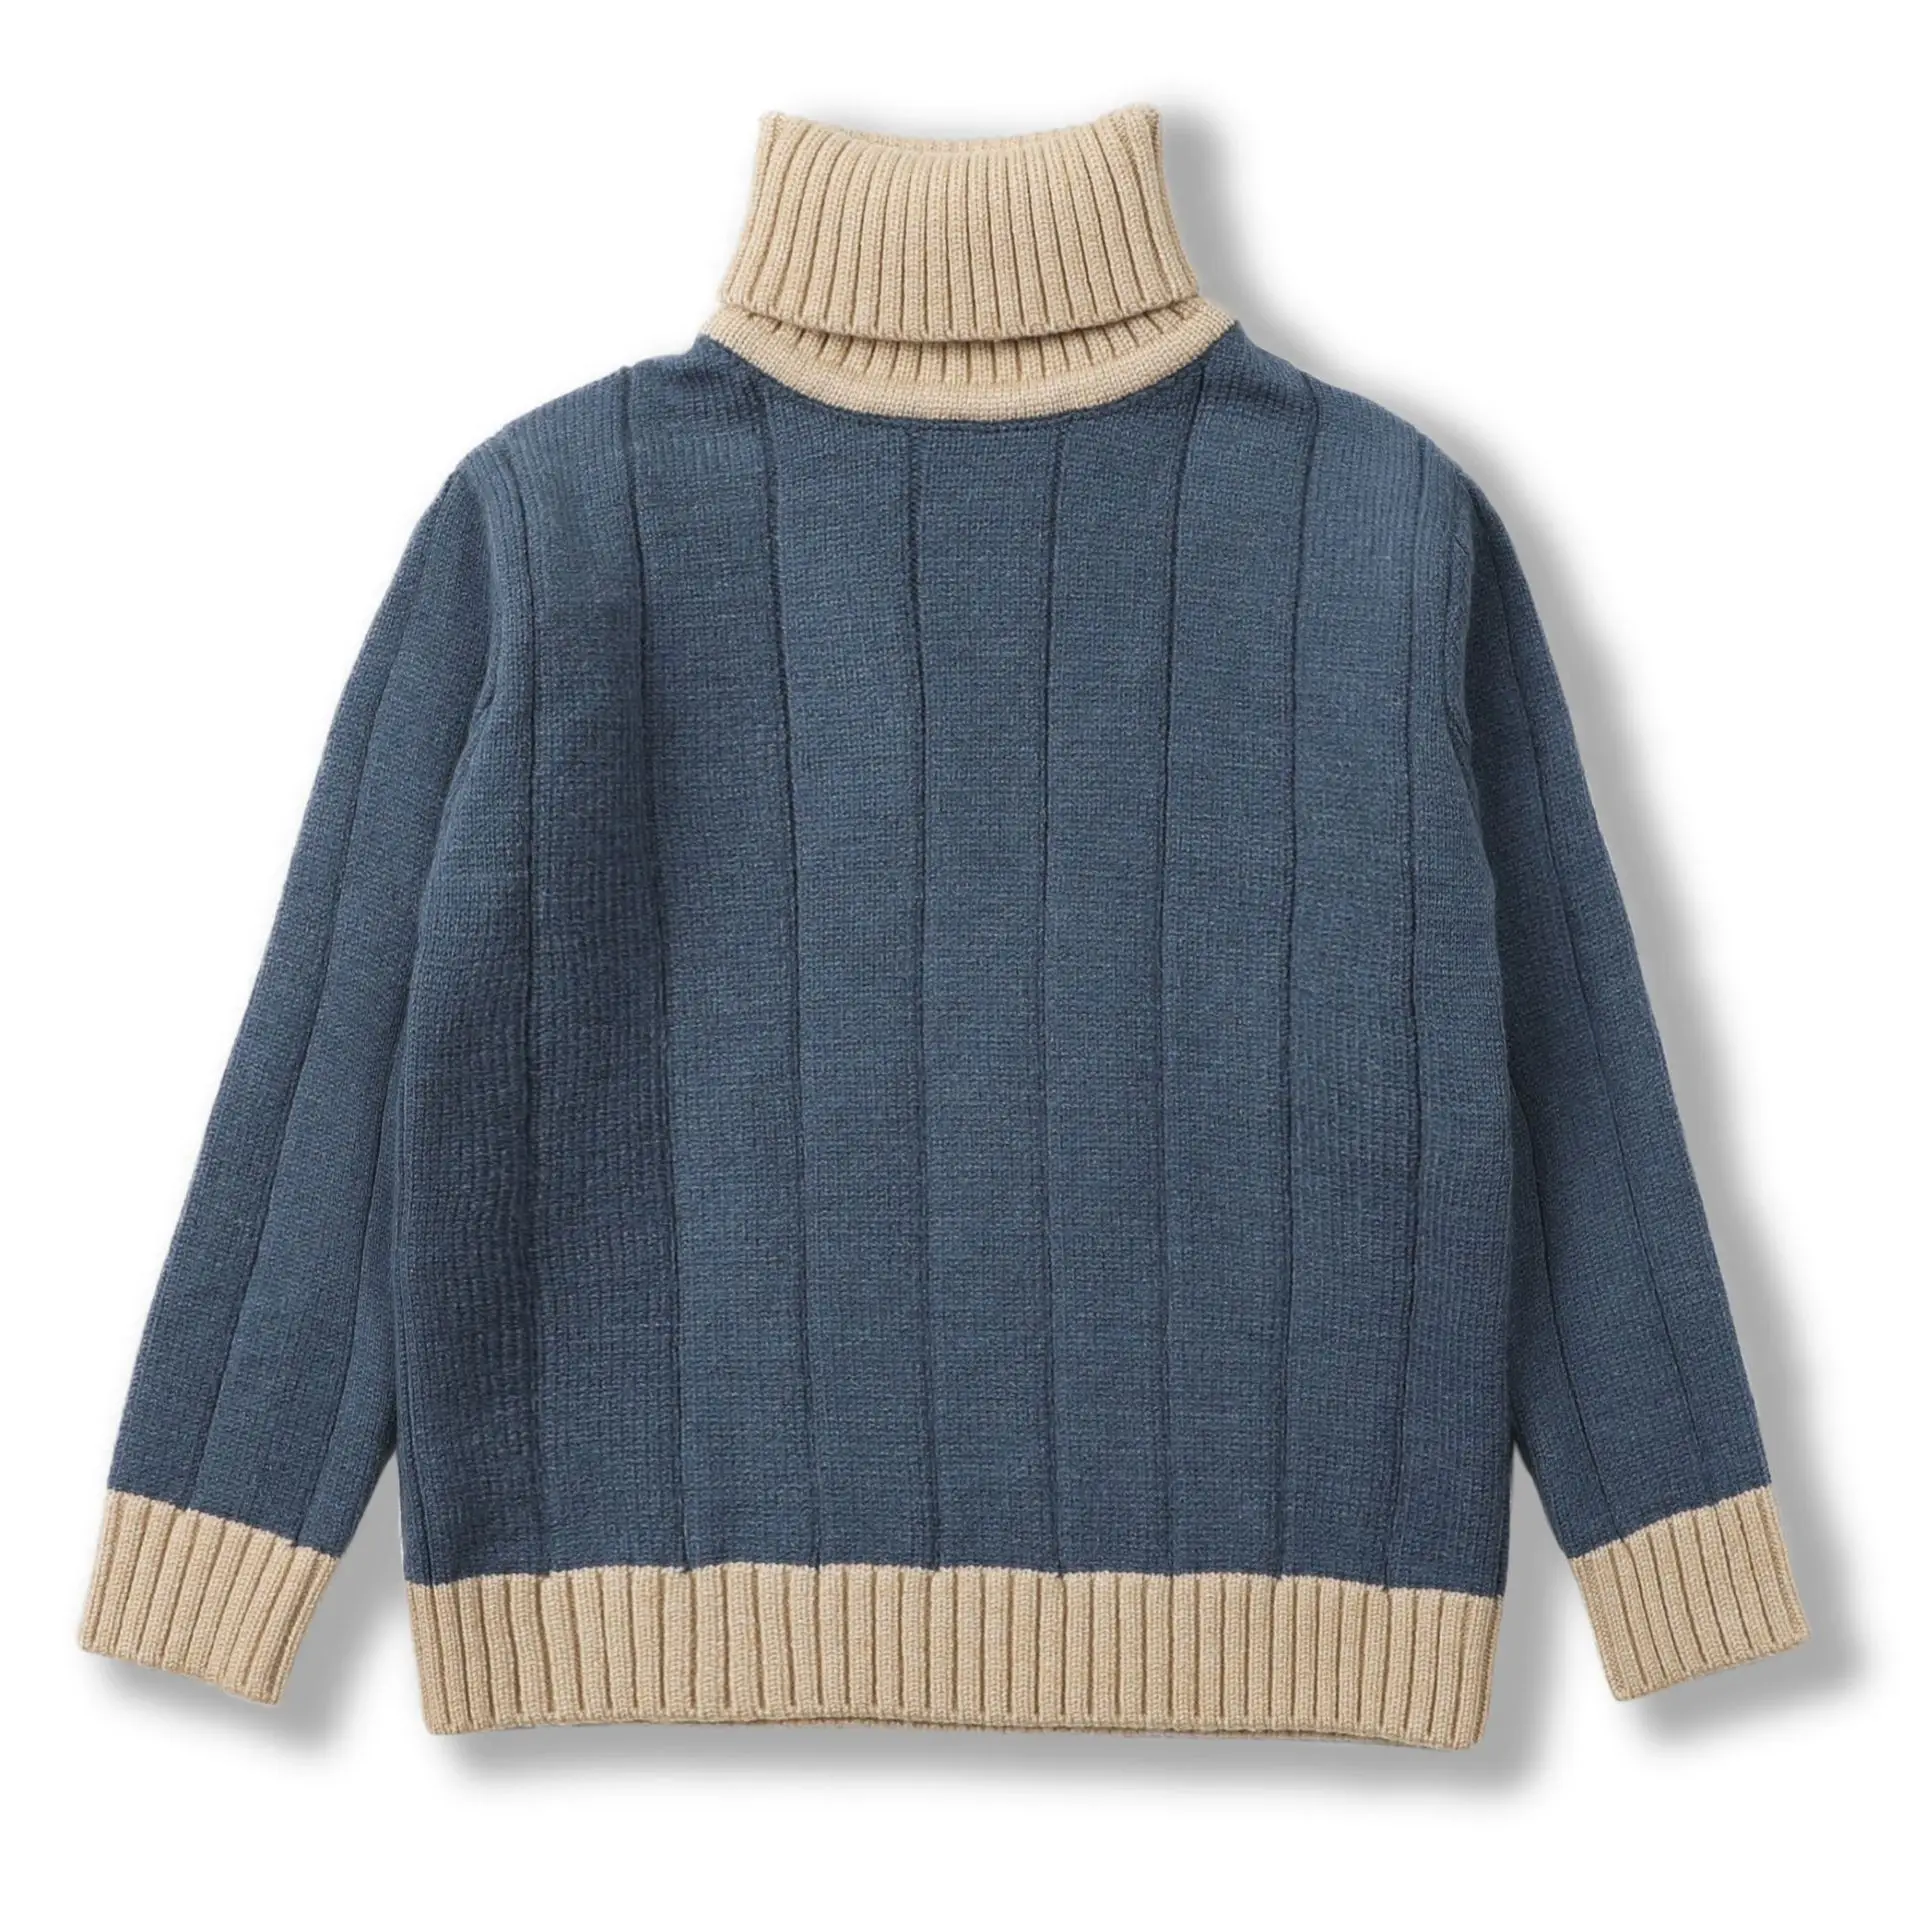 

Boys Girls Knit Pullover Children Winter Clothes Boys Cotton Oversized Sweatersuit Casual Chunky Cable Knit Baby Sweater Clothes